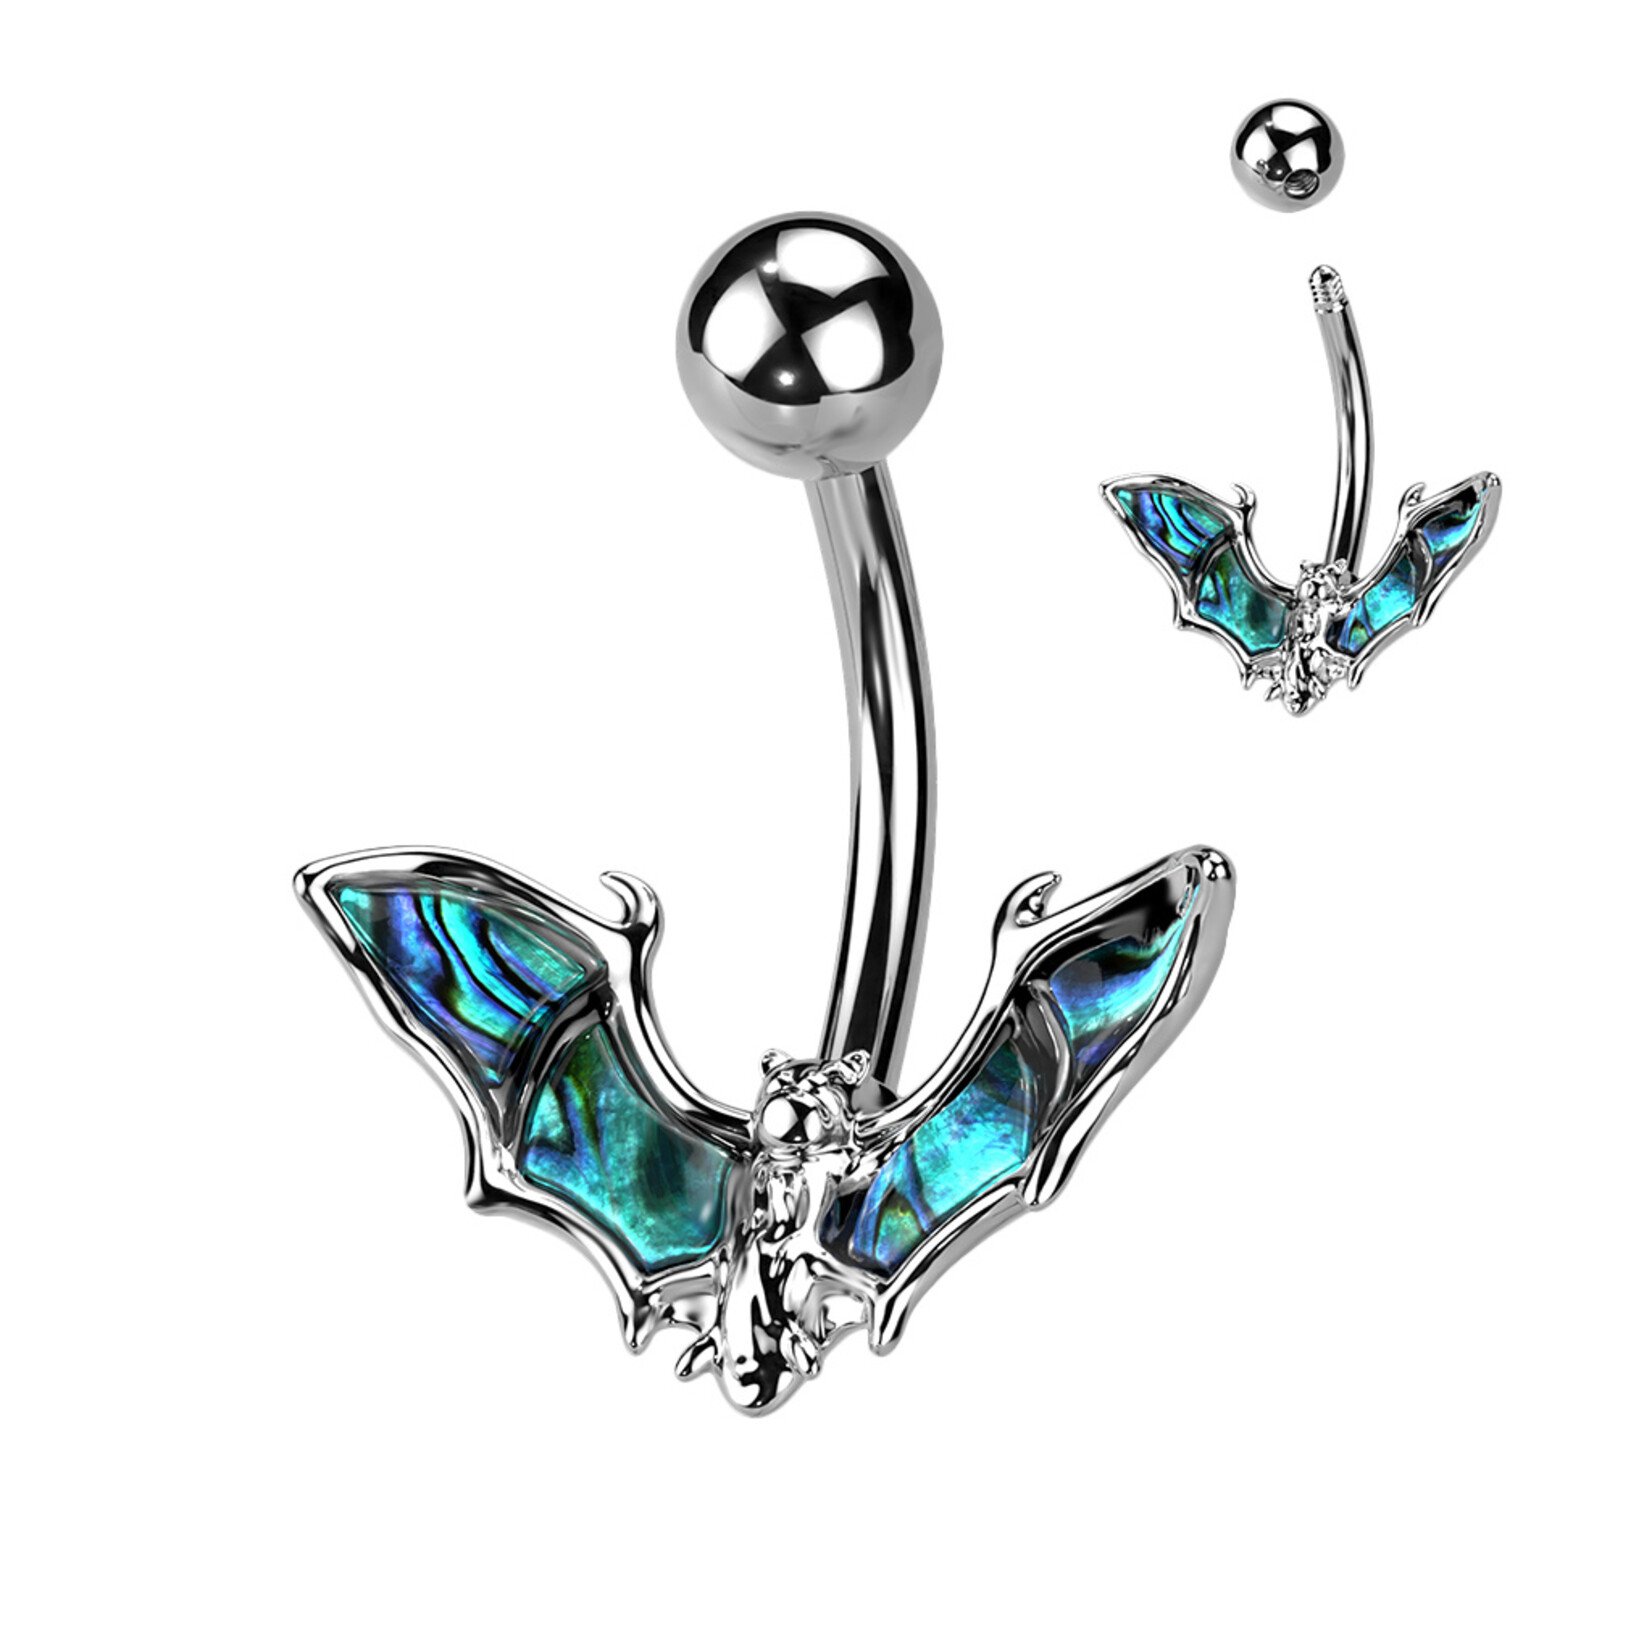 Hollywood Body Jewelry Abalone Bat Wing Navel Ring